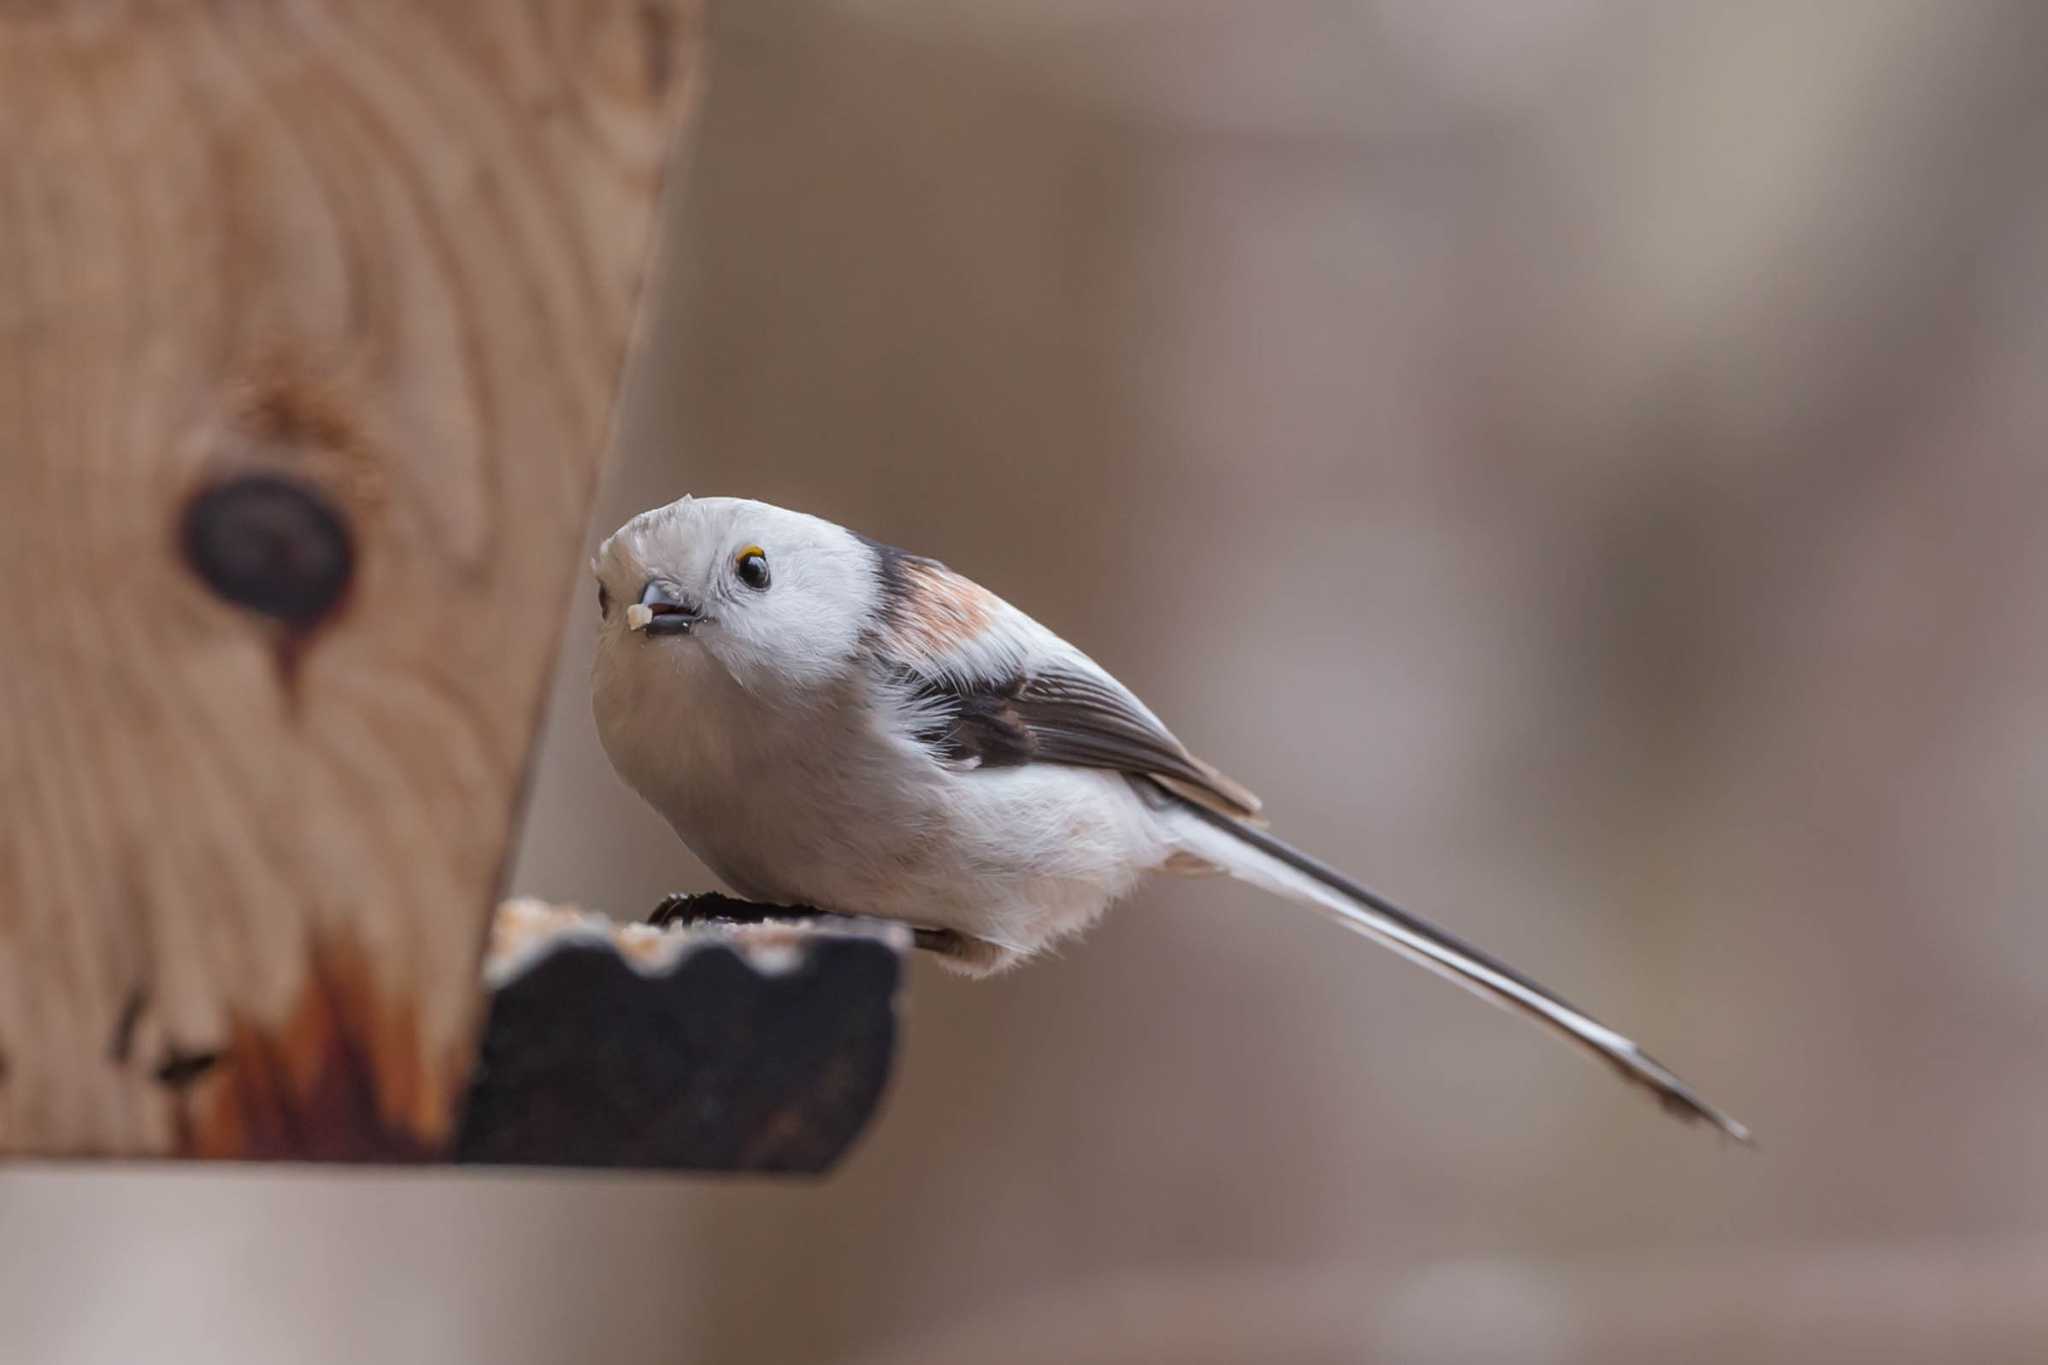 Photo of Long-tailed tit(japonicus) at The Bird Watching Cafe by 小鳥遊雪子